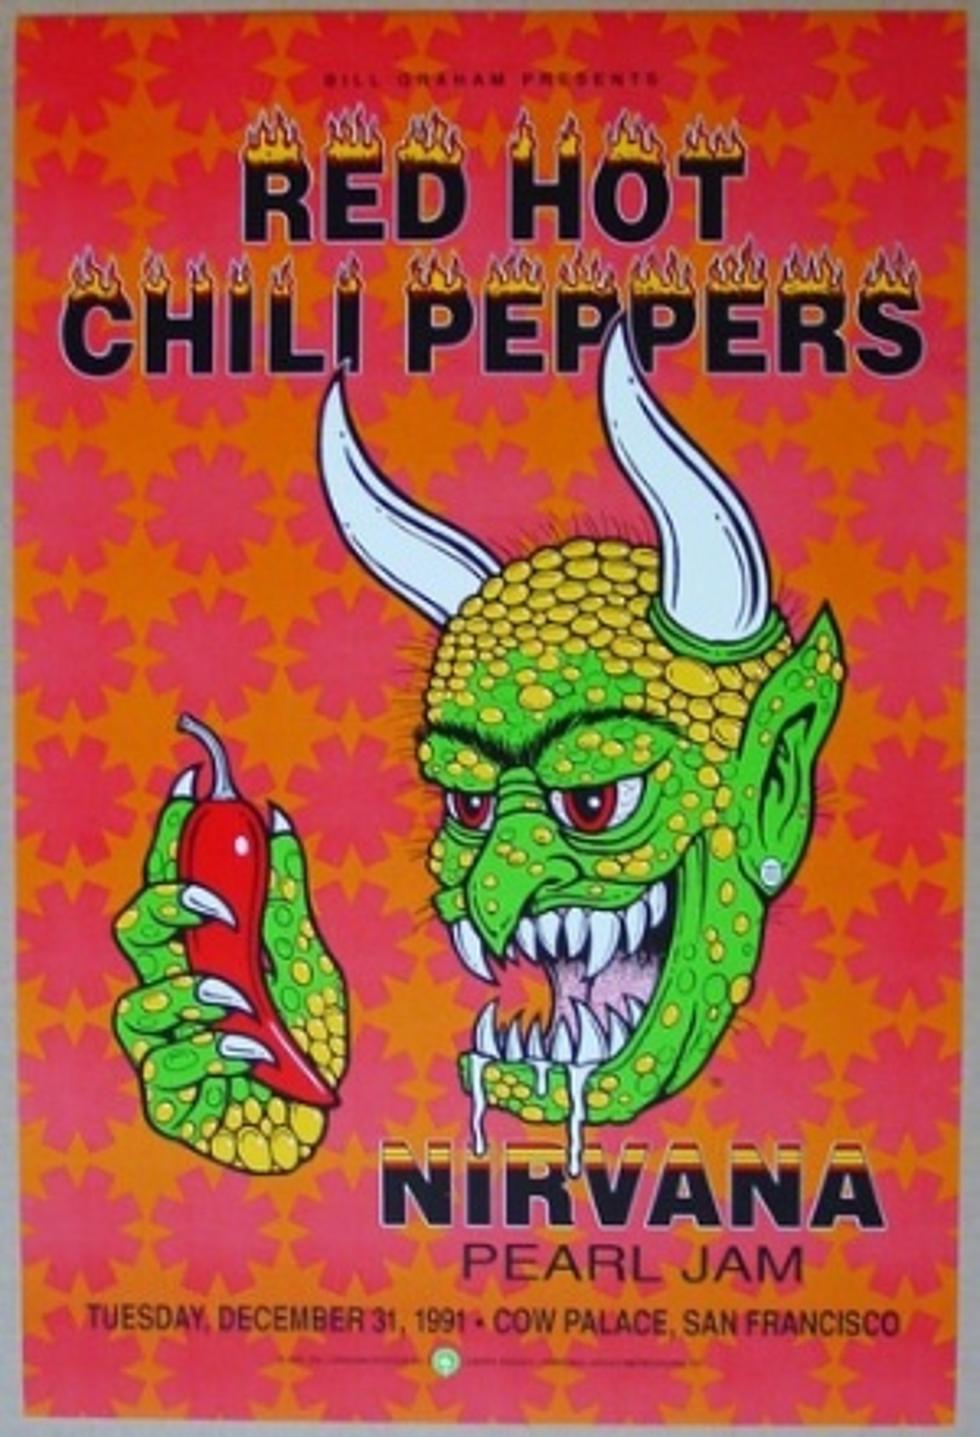 Rare Red Hot Chili Peppers, Nirvana + Pearl Jam Concert Poster Makes Its Way to eBay